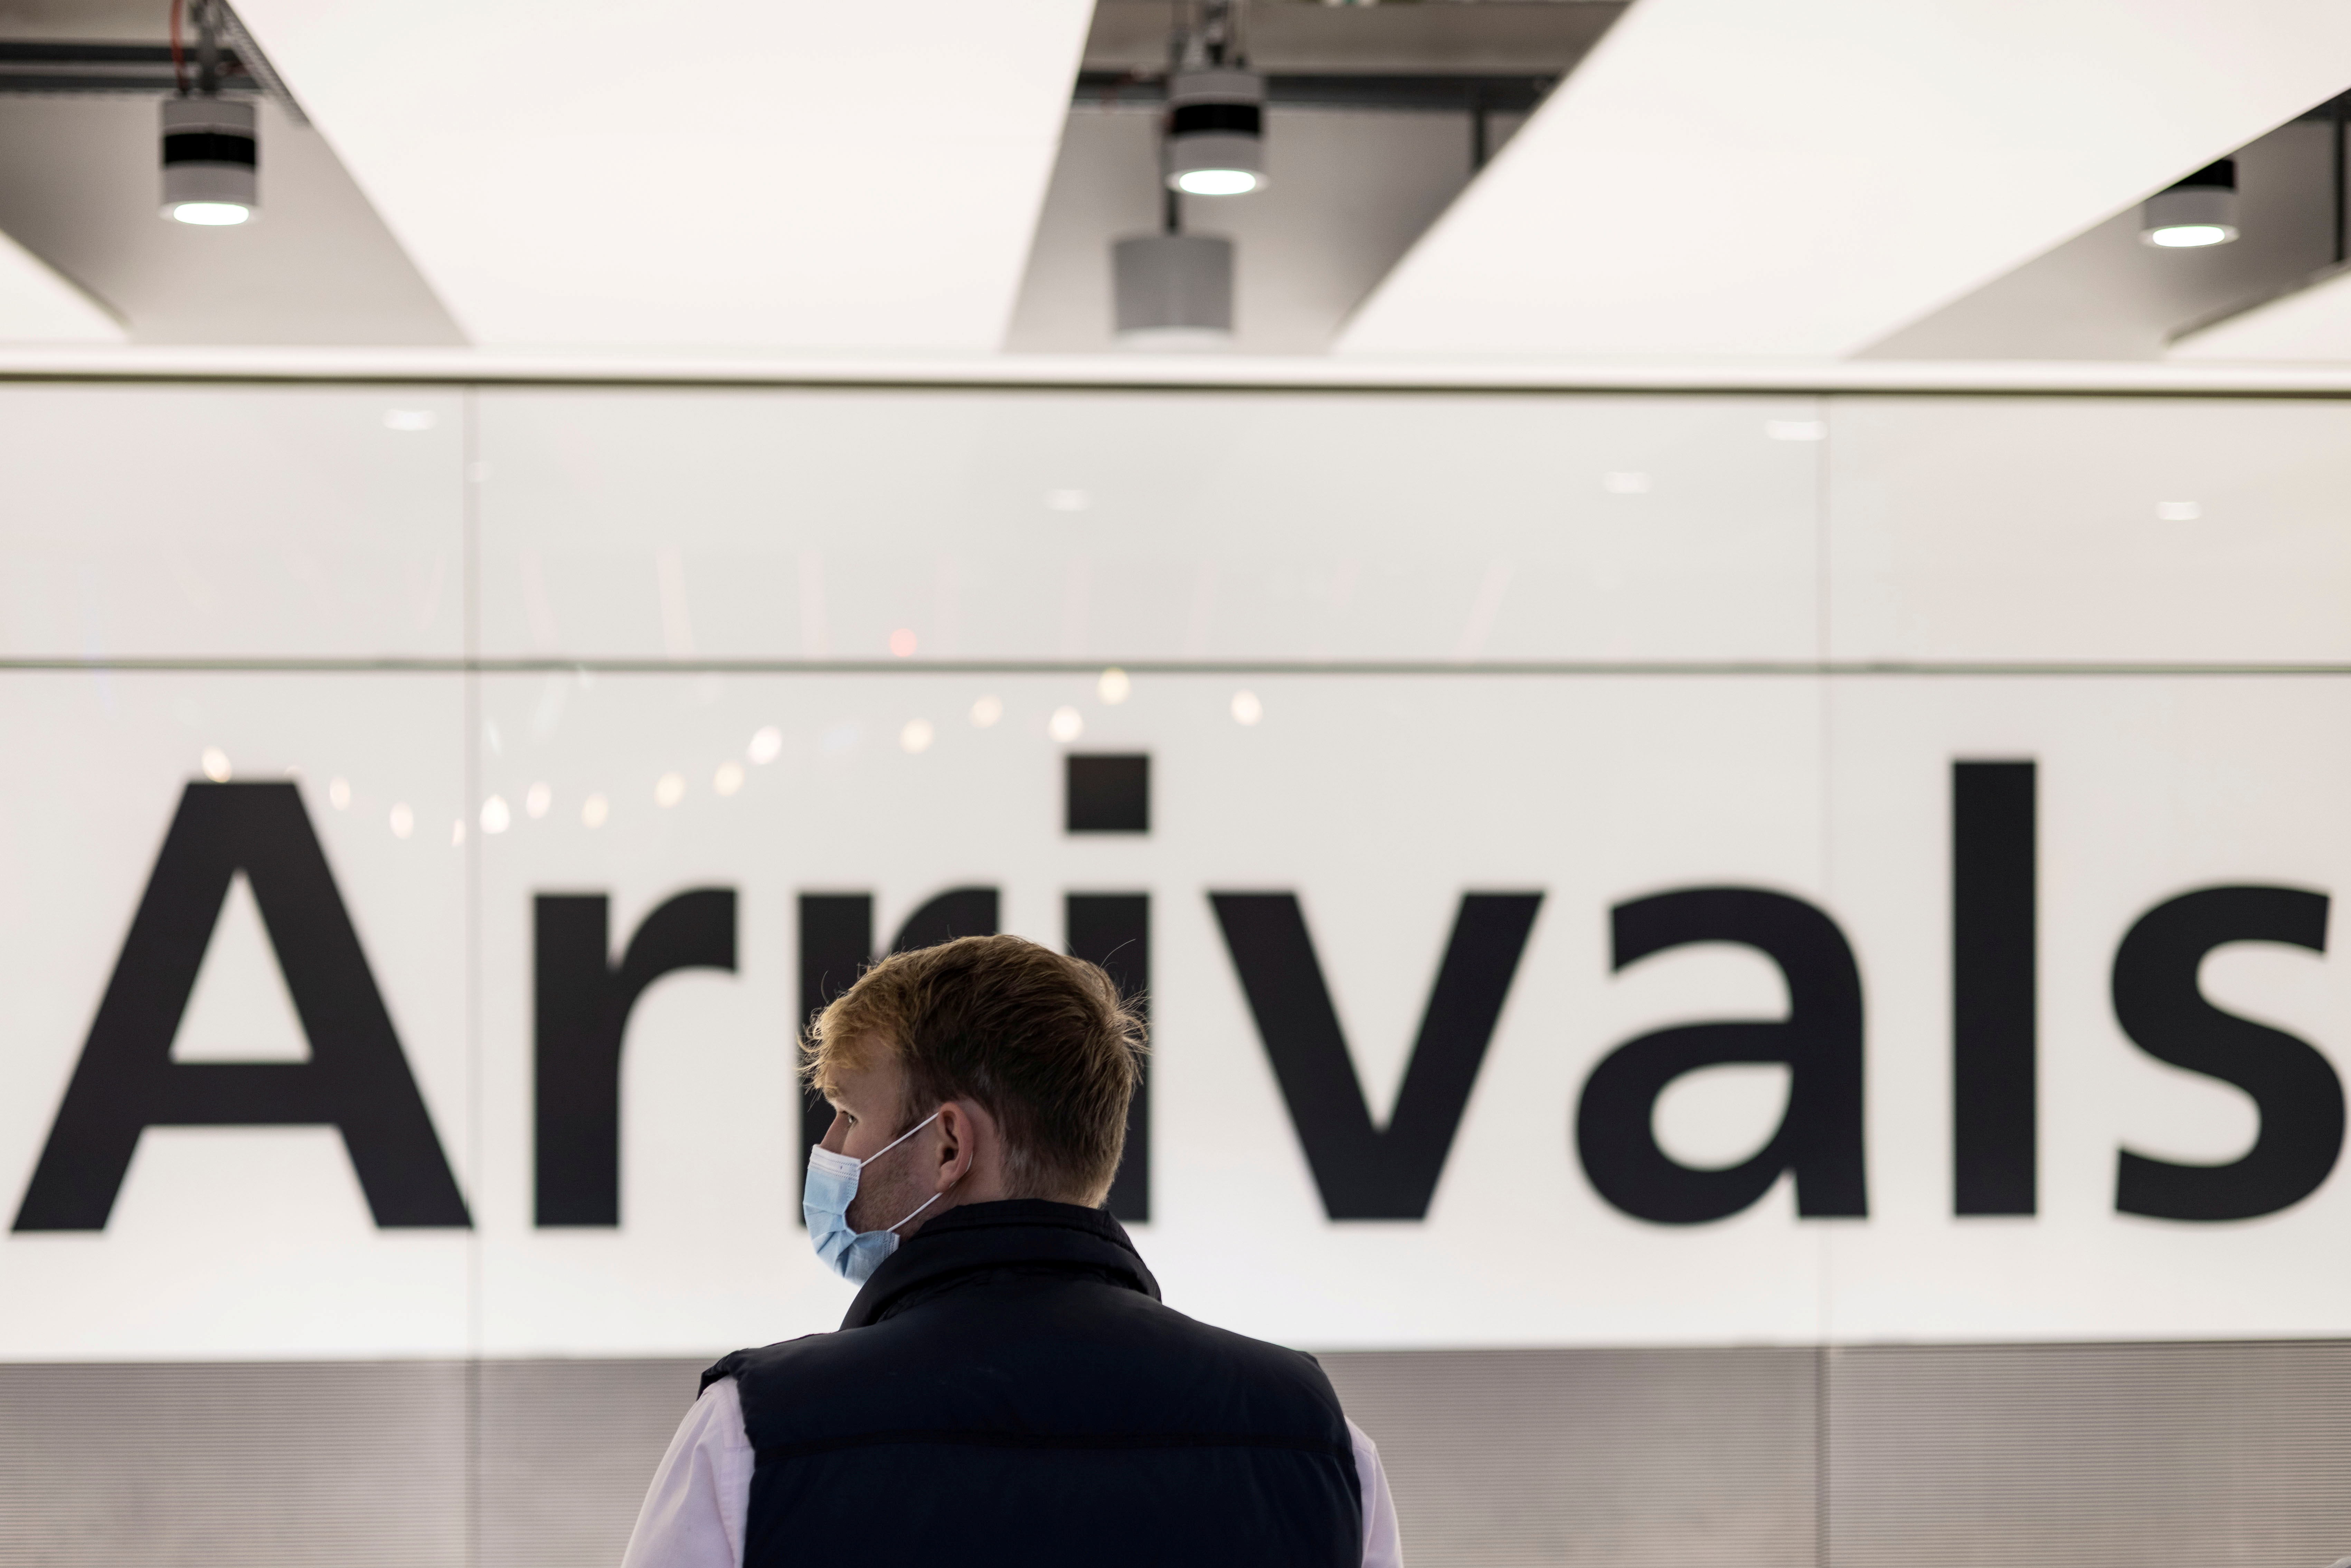 A man is seen waiting at the arrival area of terminal 5 following the lifting of restrictions on the entry of non-U.S. citizens imposed to help curb the spread of the coronavirus disease (COVID-19), at Heathrow International airport, in London, Britain November 8, 2021. 